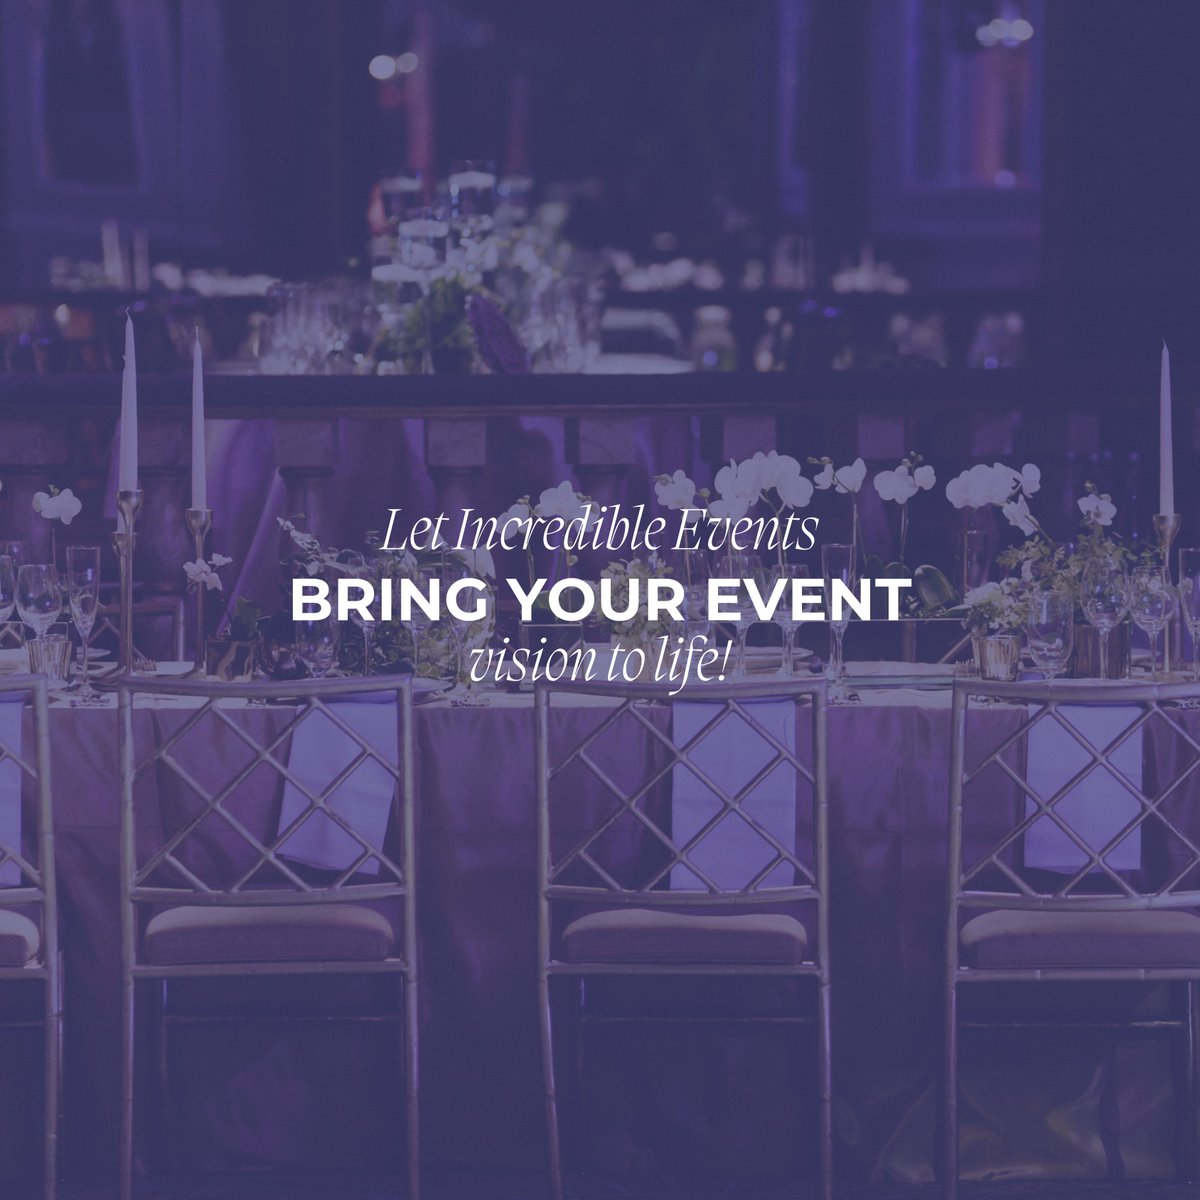 Leave the planning stress to us! From workshops to #weddings, Incredible Events & Weddings ensures a flawless experience. Focus on making #memories while we handle the details. Your event will be amazing with us!

#incredibleevents #eventmanagementcompany #StressFreeEvents